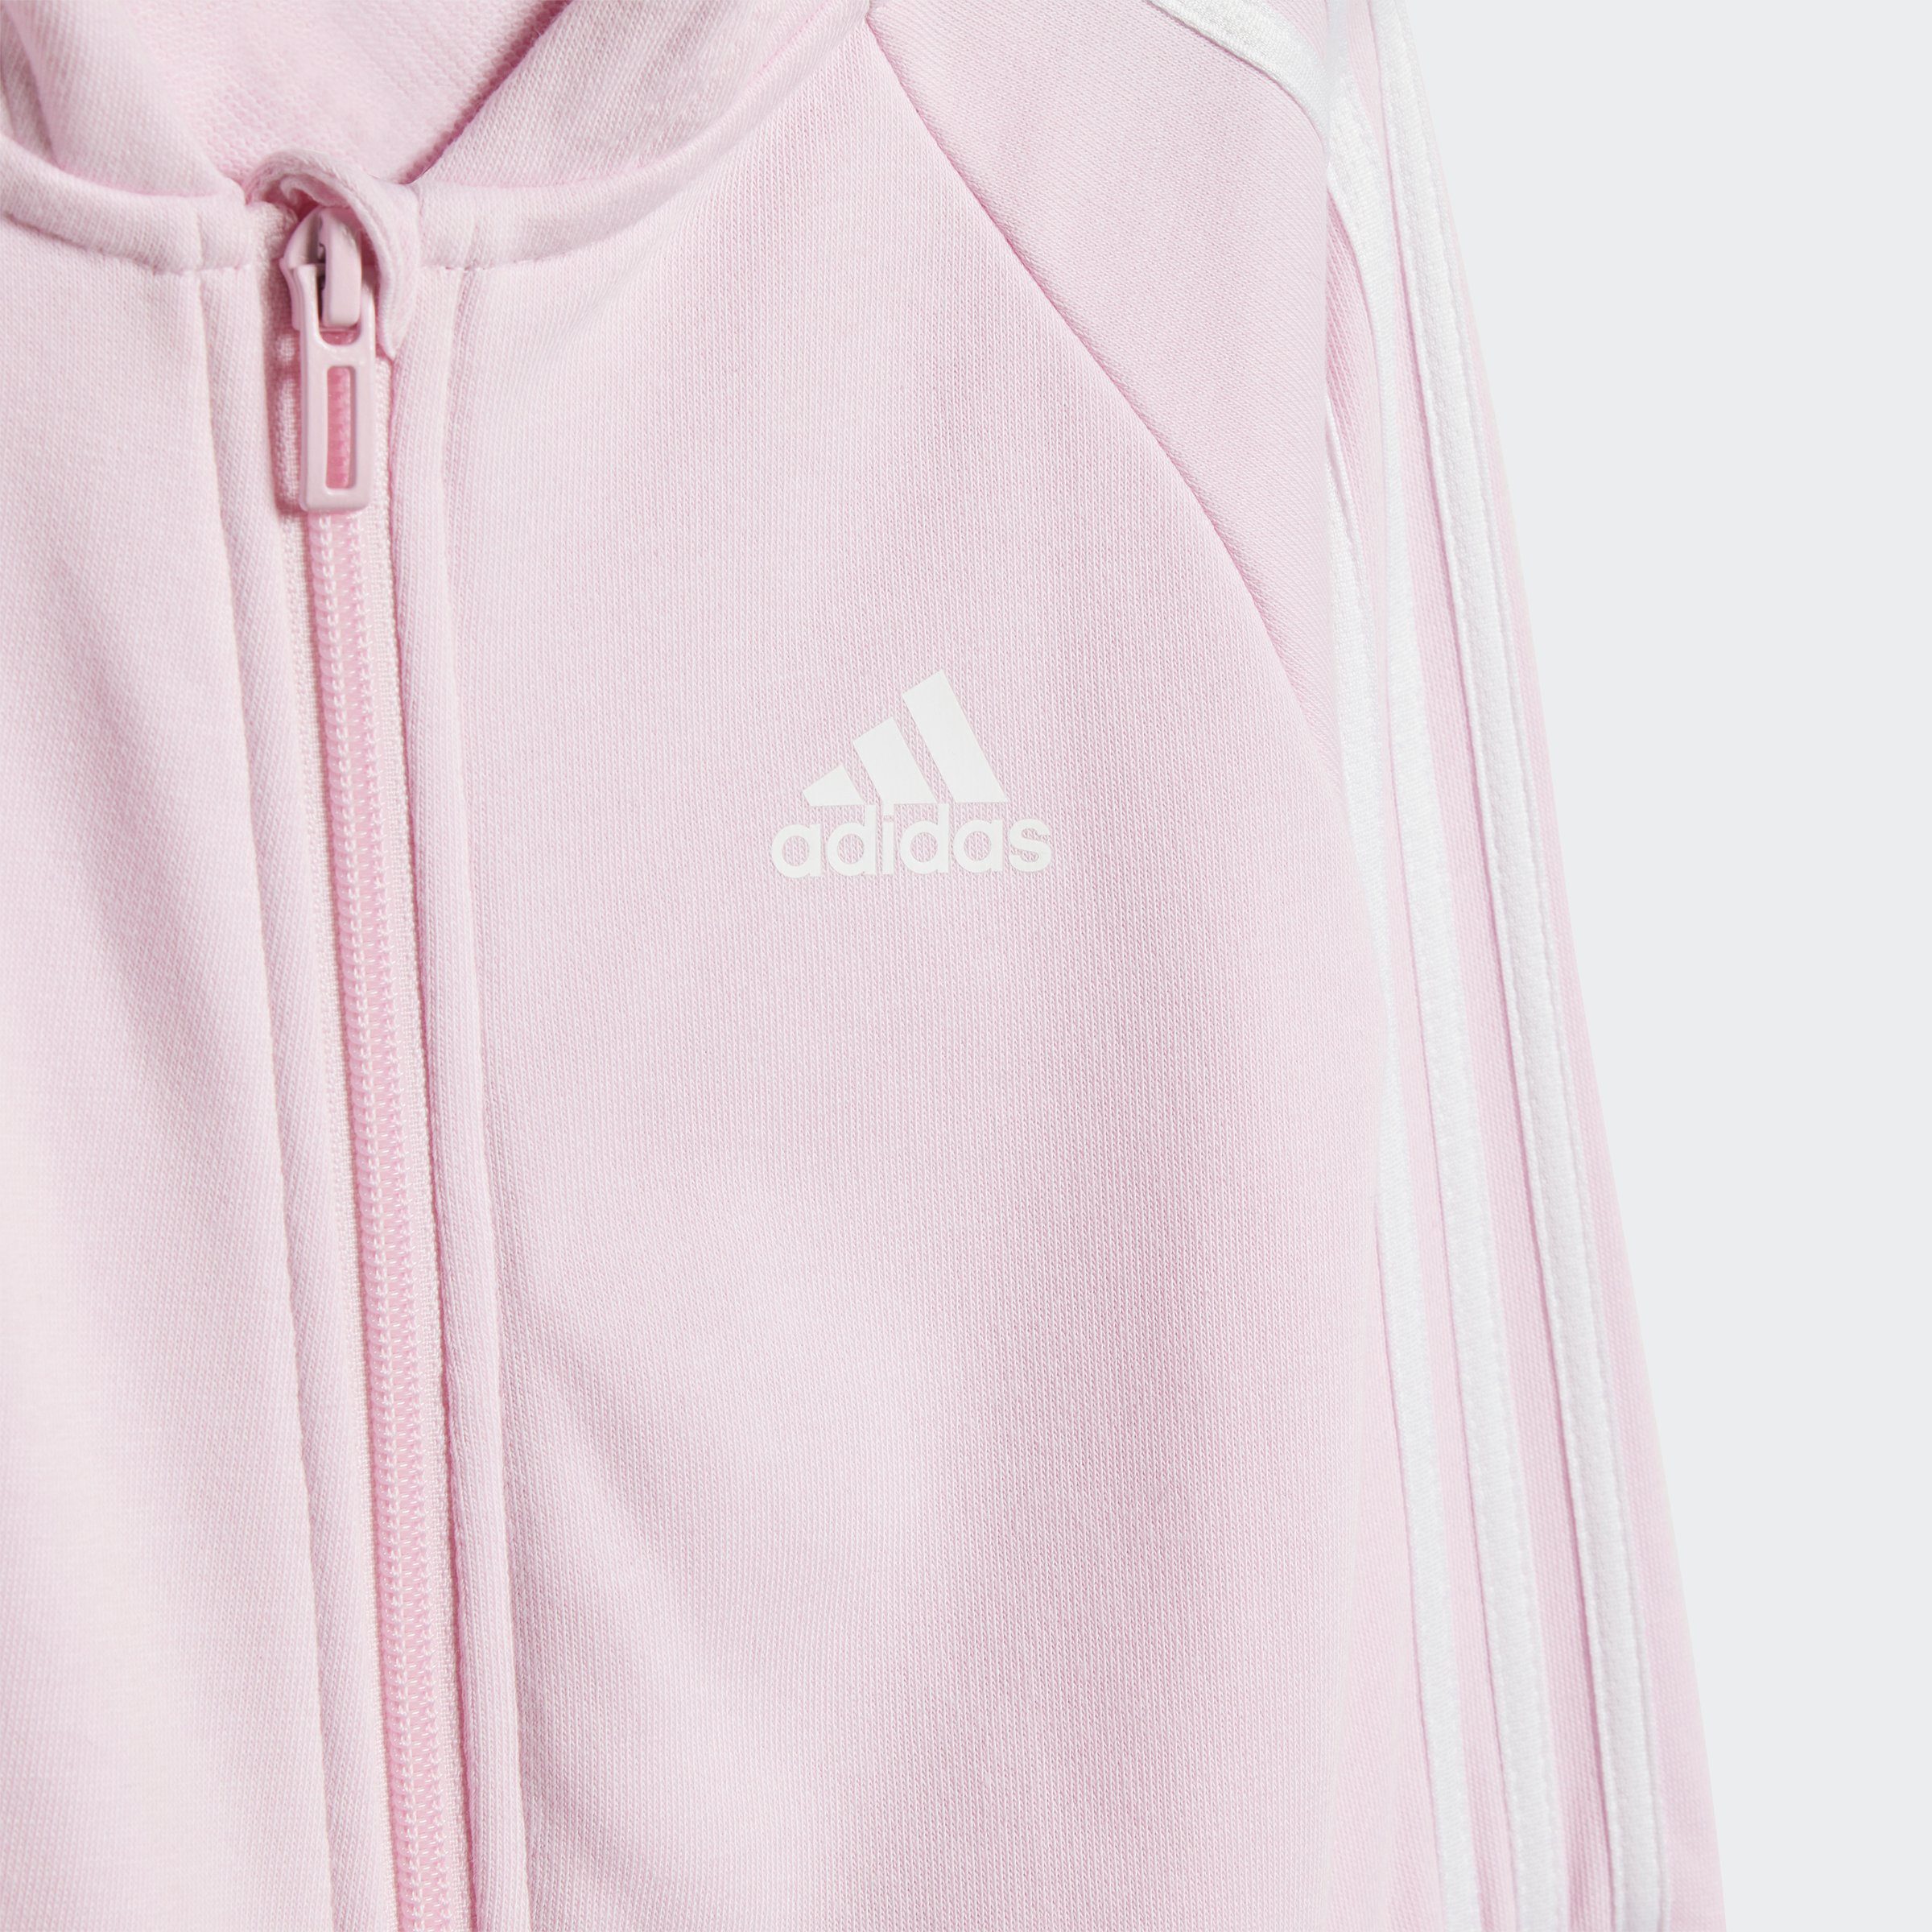 ONESIE White / Overall 3S Sportswear Clear adidas FT I Pink